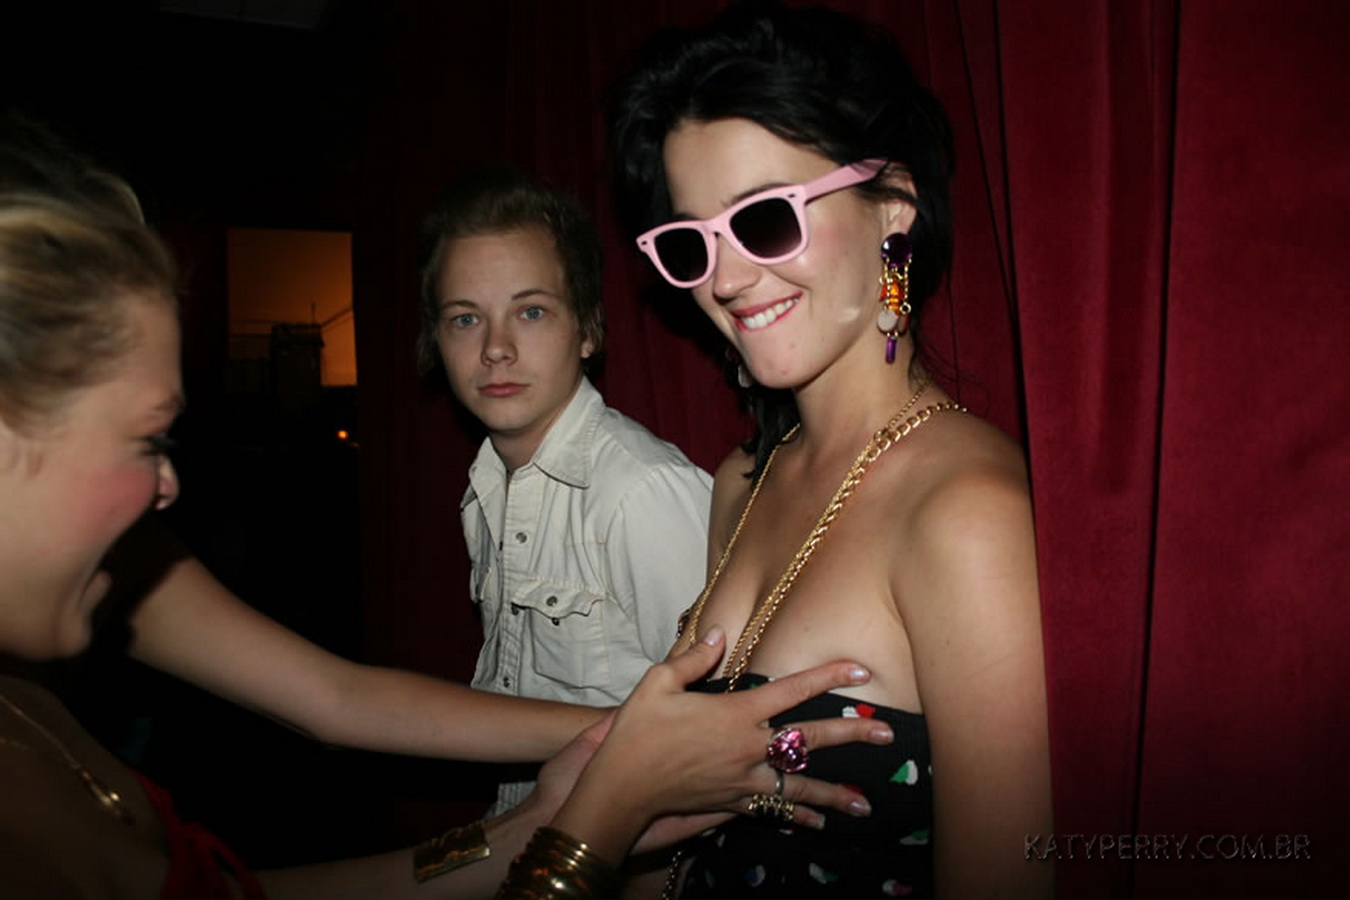 Katy_Perry_bobsslip_drunk_cleavage_downblouse_upskirt_nipslip_at_her_birthday_2007_party_99x_HQ_28.jpg